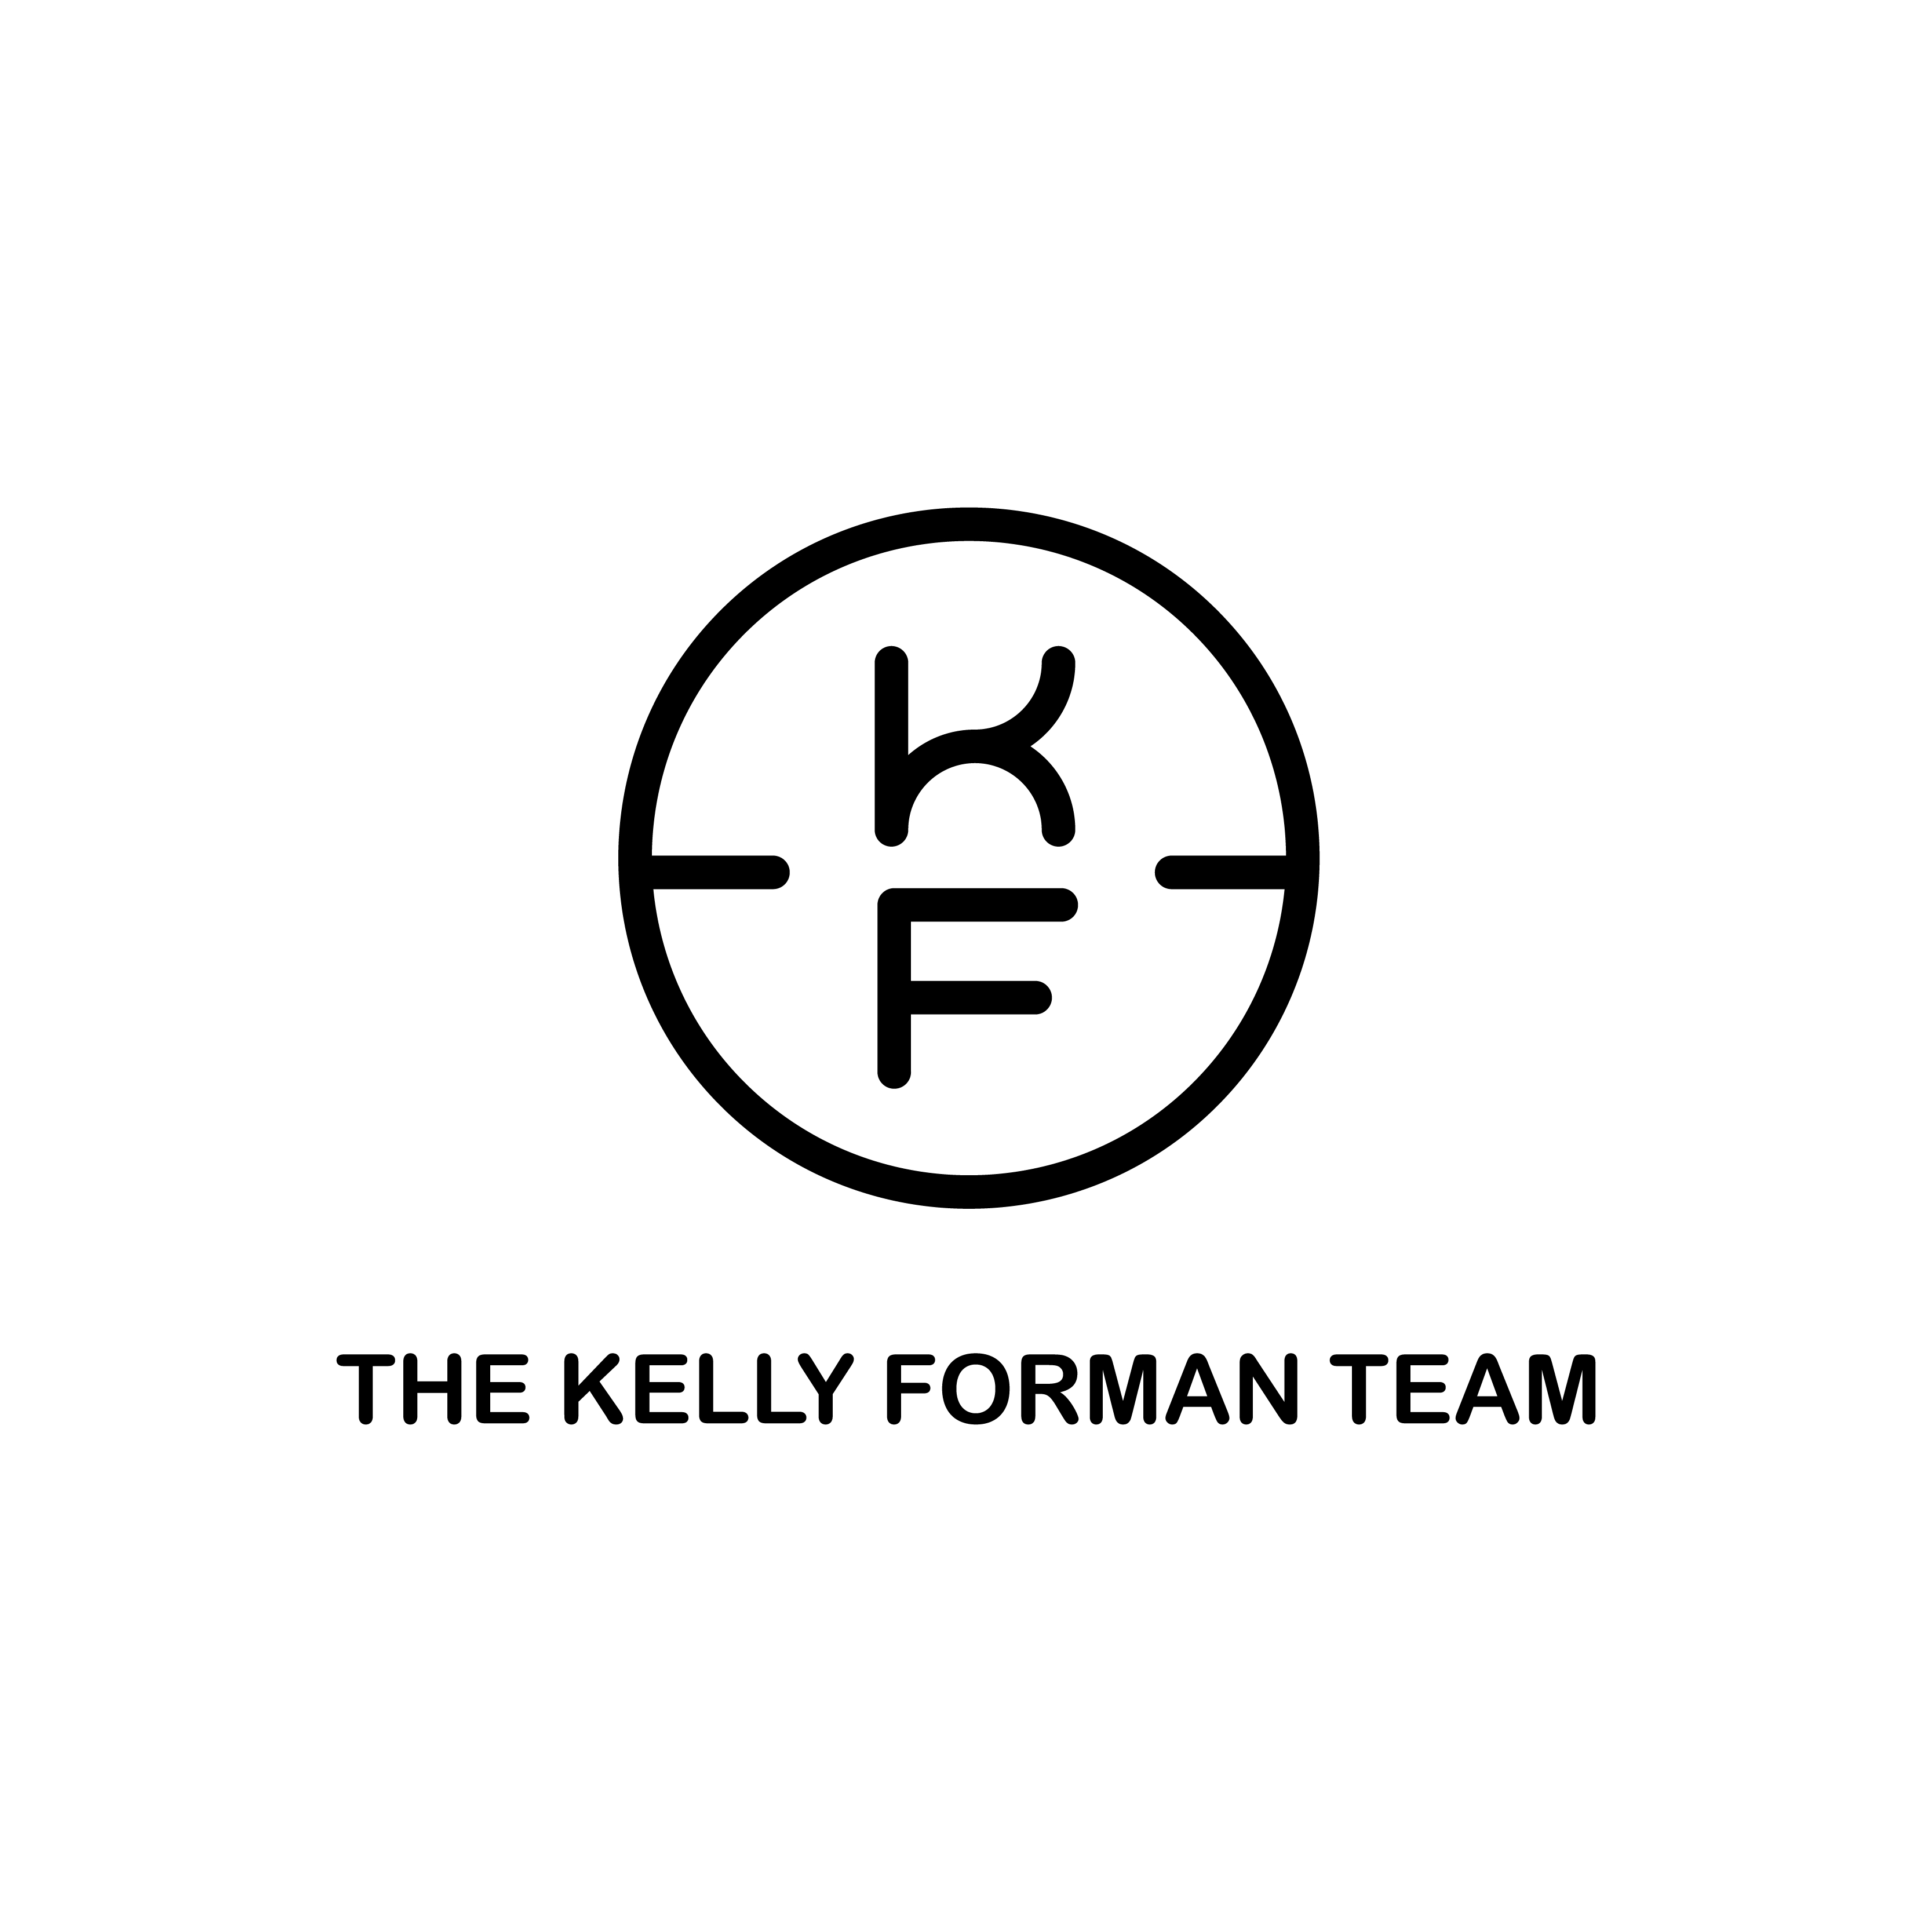 The logo of The Kelly Forman Team